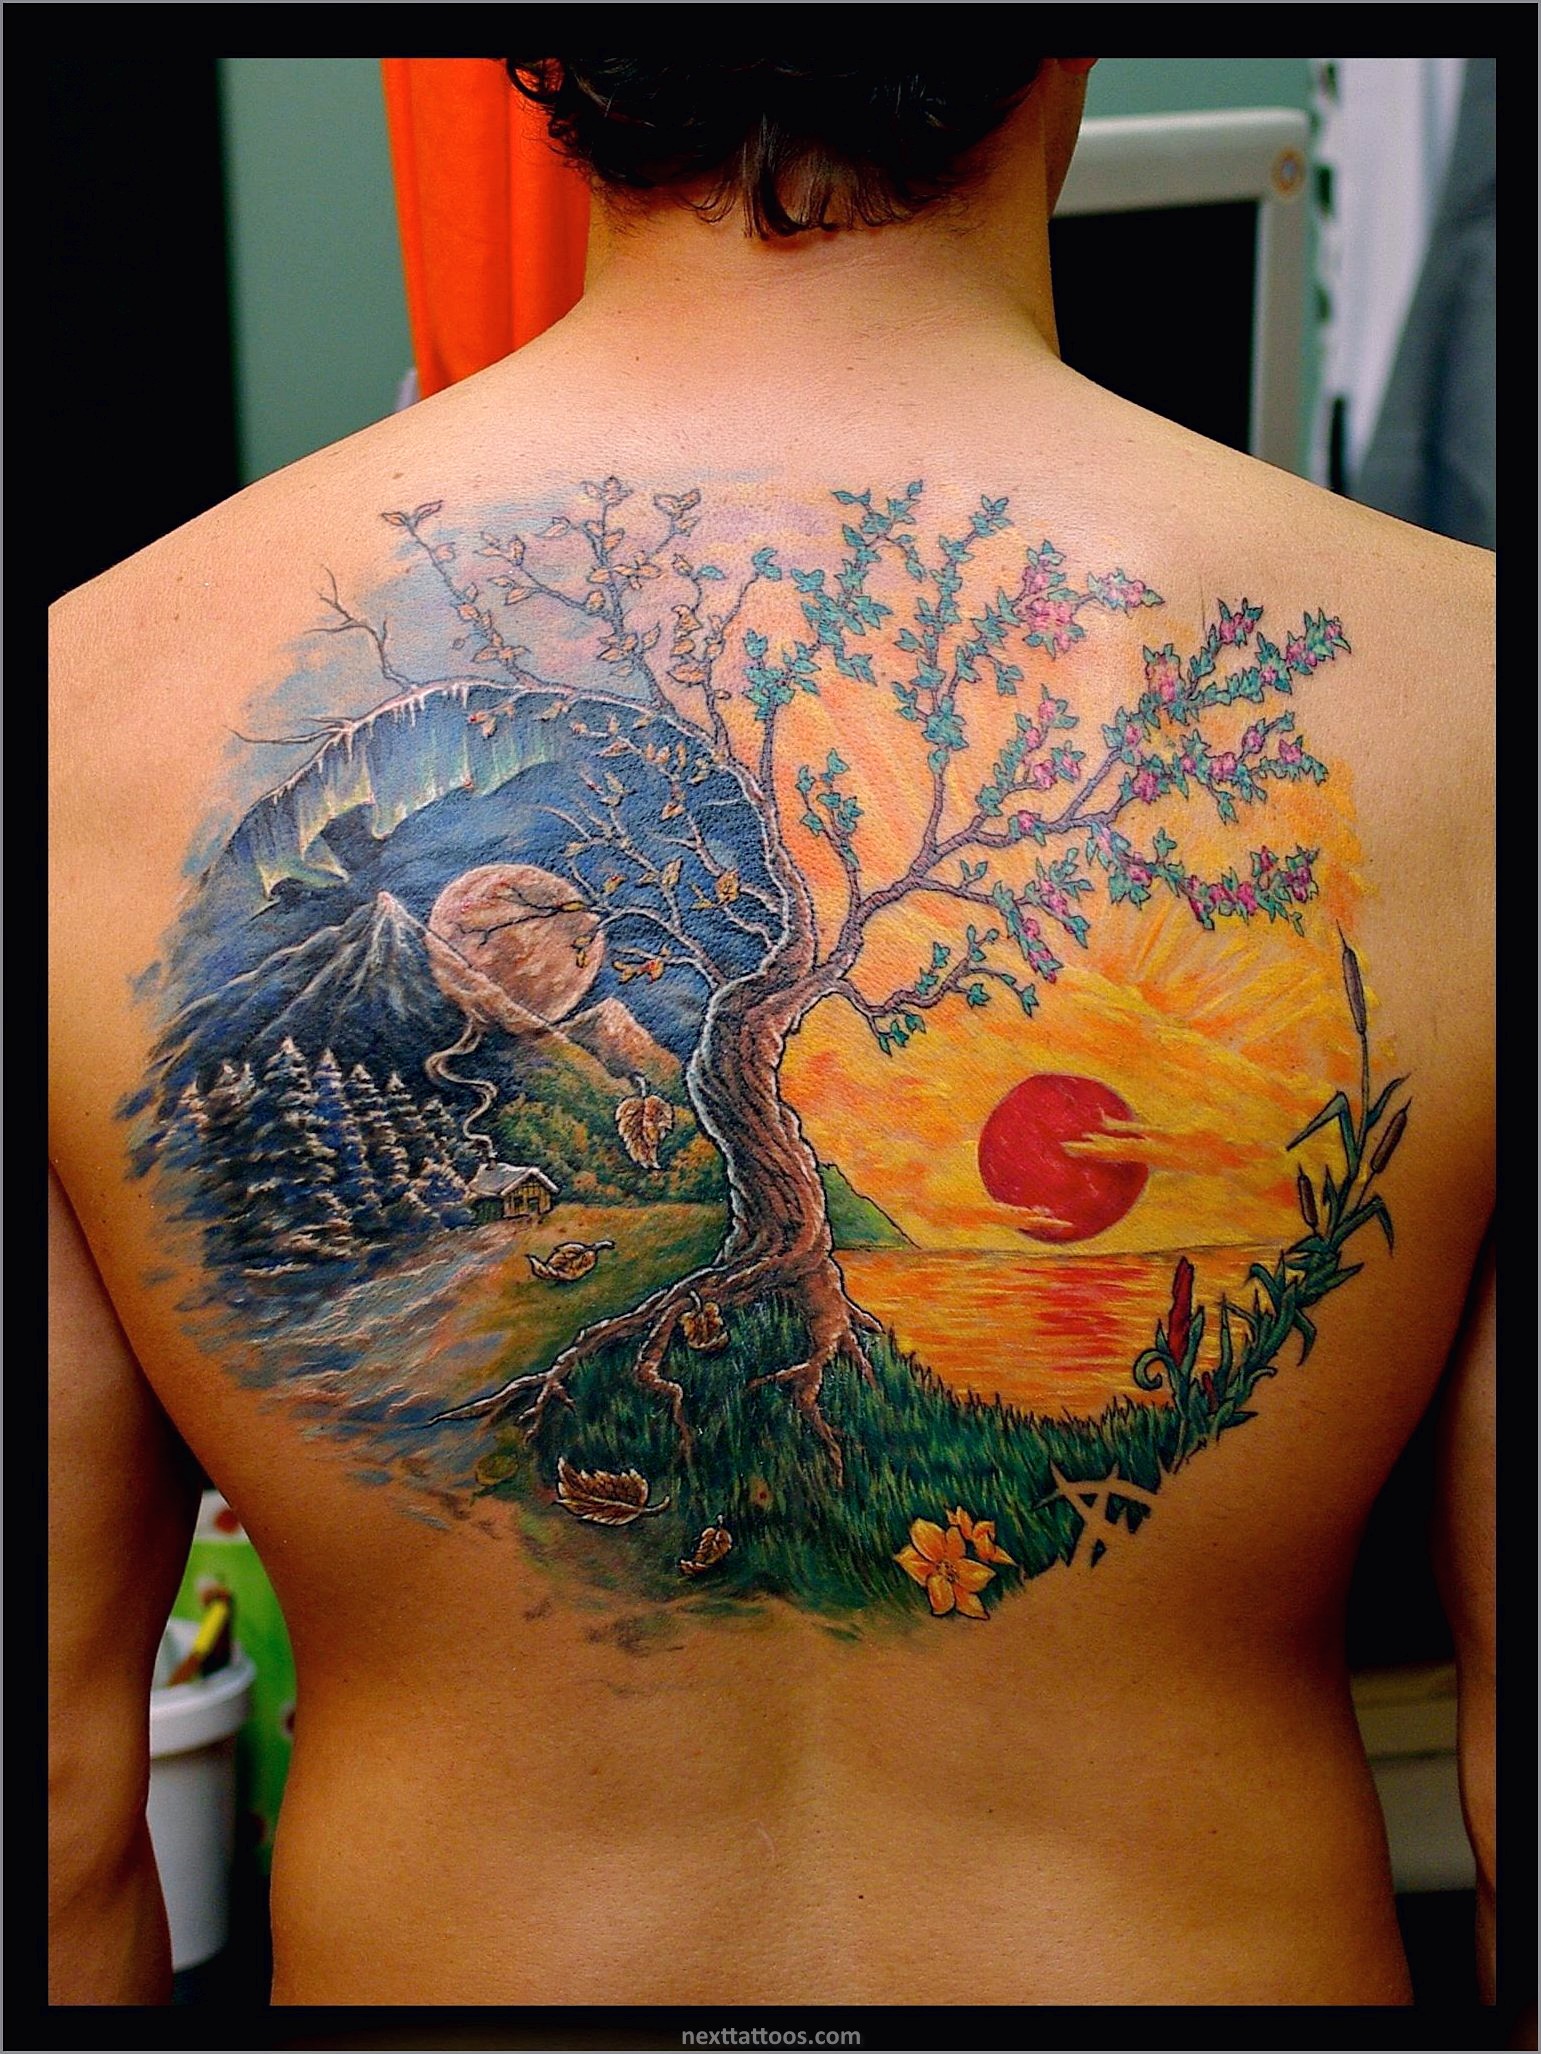 Nature Back Tattoos and Nature Upper Back Tattoos